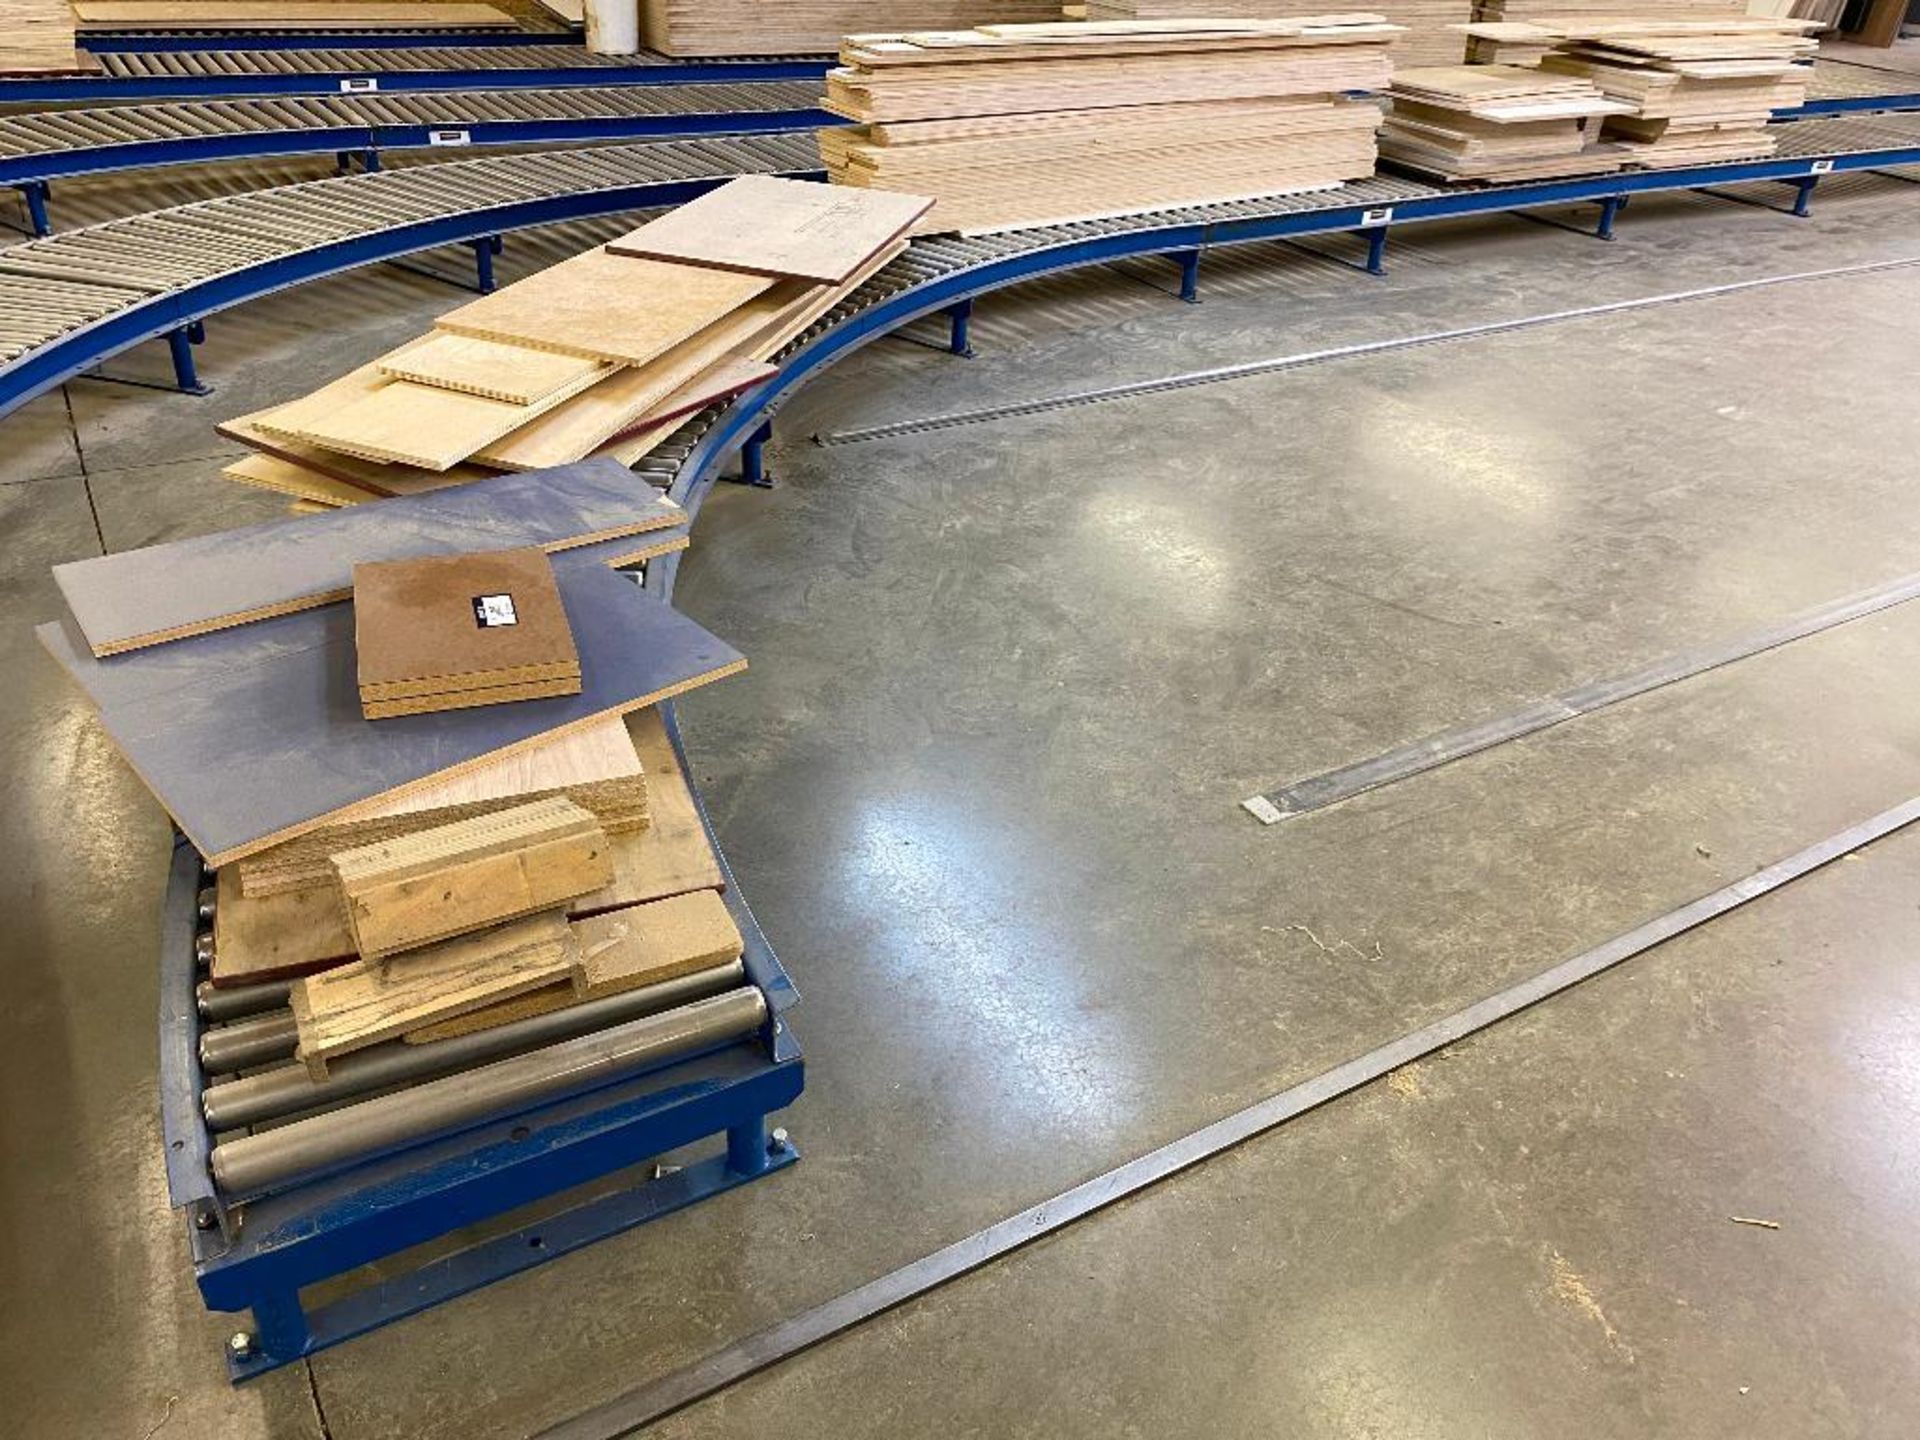 Contents of Conveyor Line including Asst. Plywood and Particle Board, etc. - Image 6 of 6